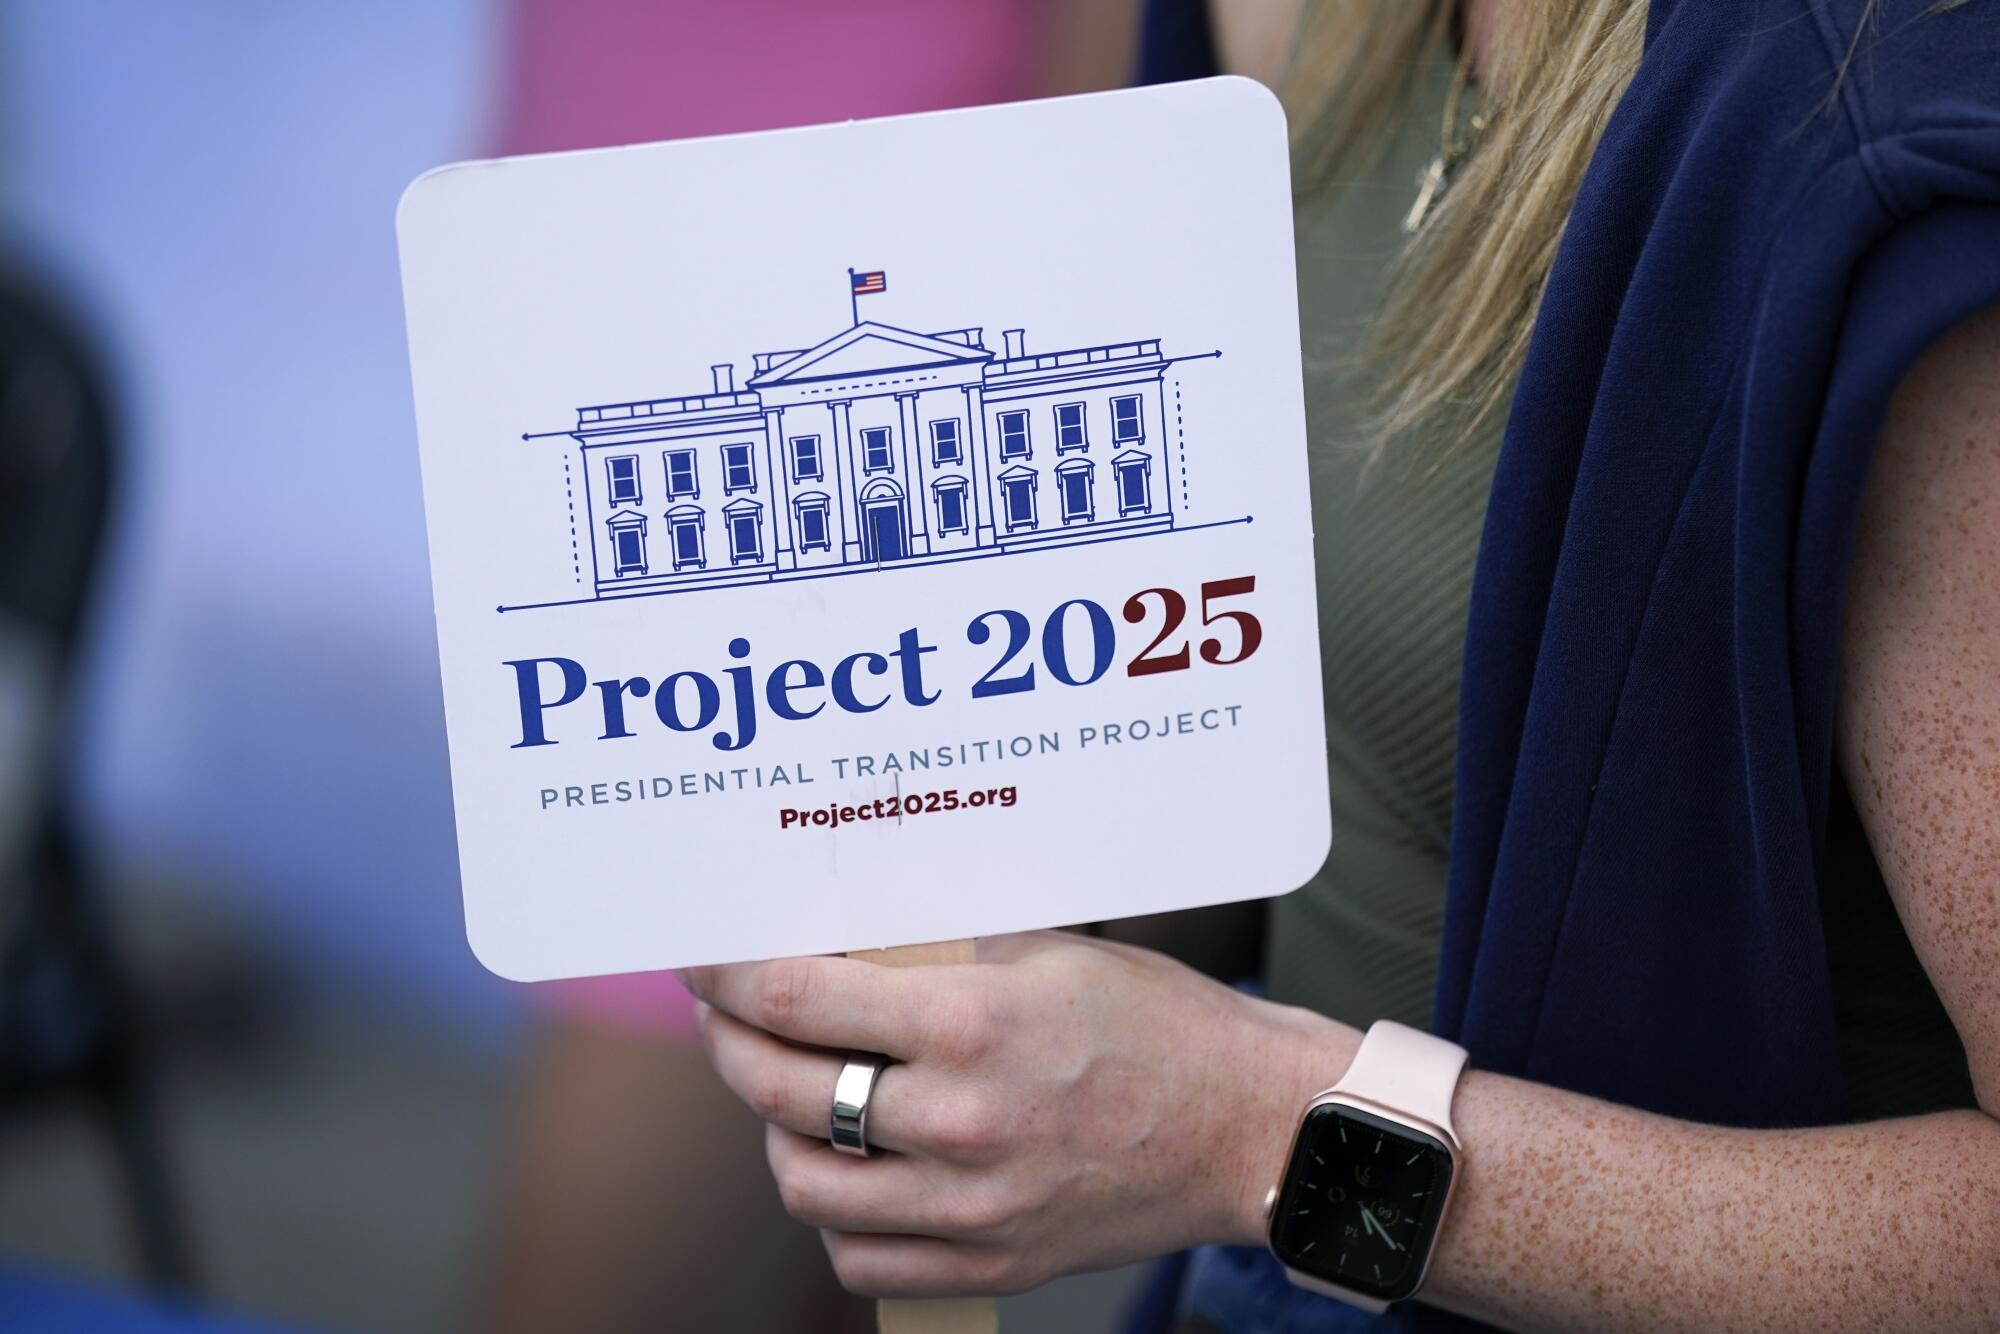 A woman holds a sign that reads "Project 2025" and shows an image of the White House.